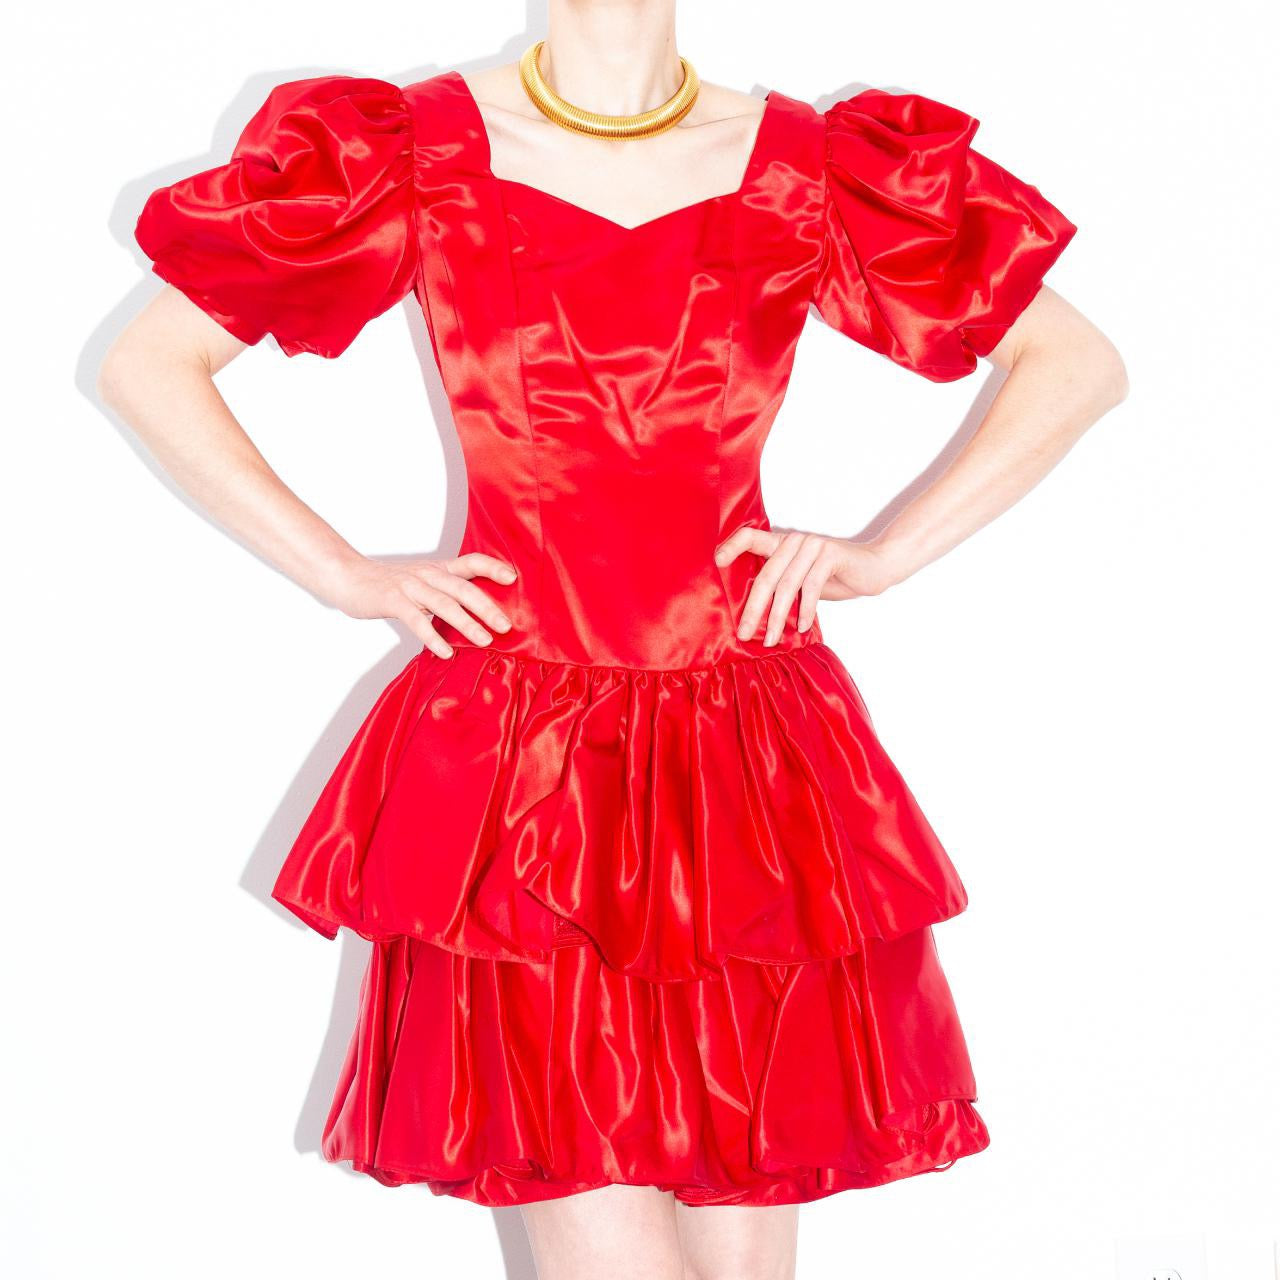 Vintage 90s Poison Candy Apple Red Tiered Ruffle Party Dress